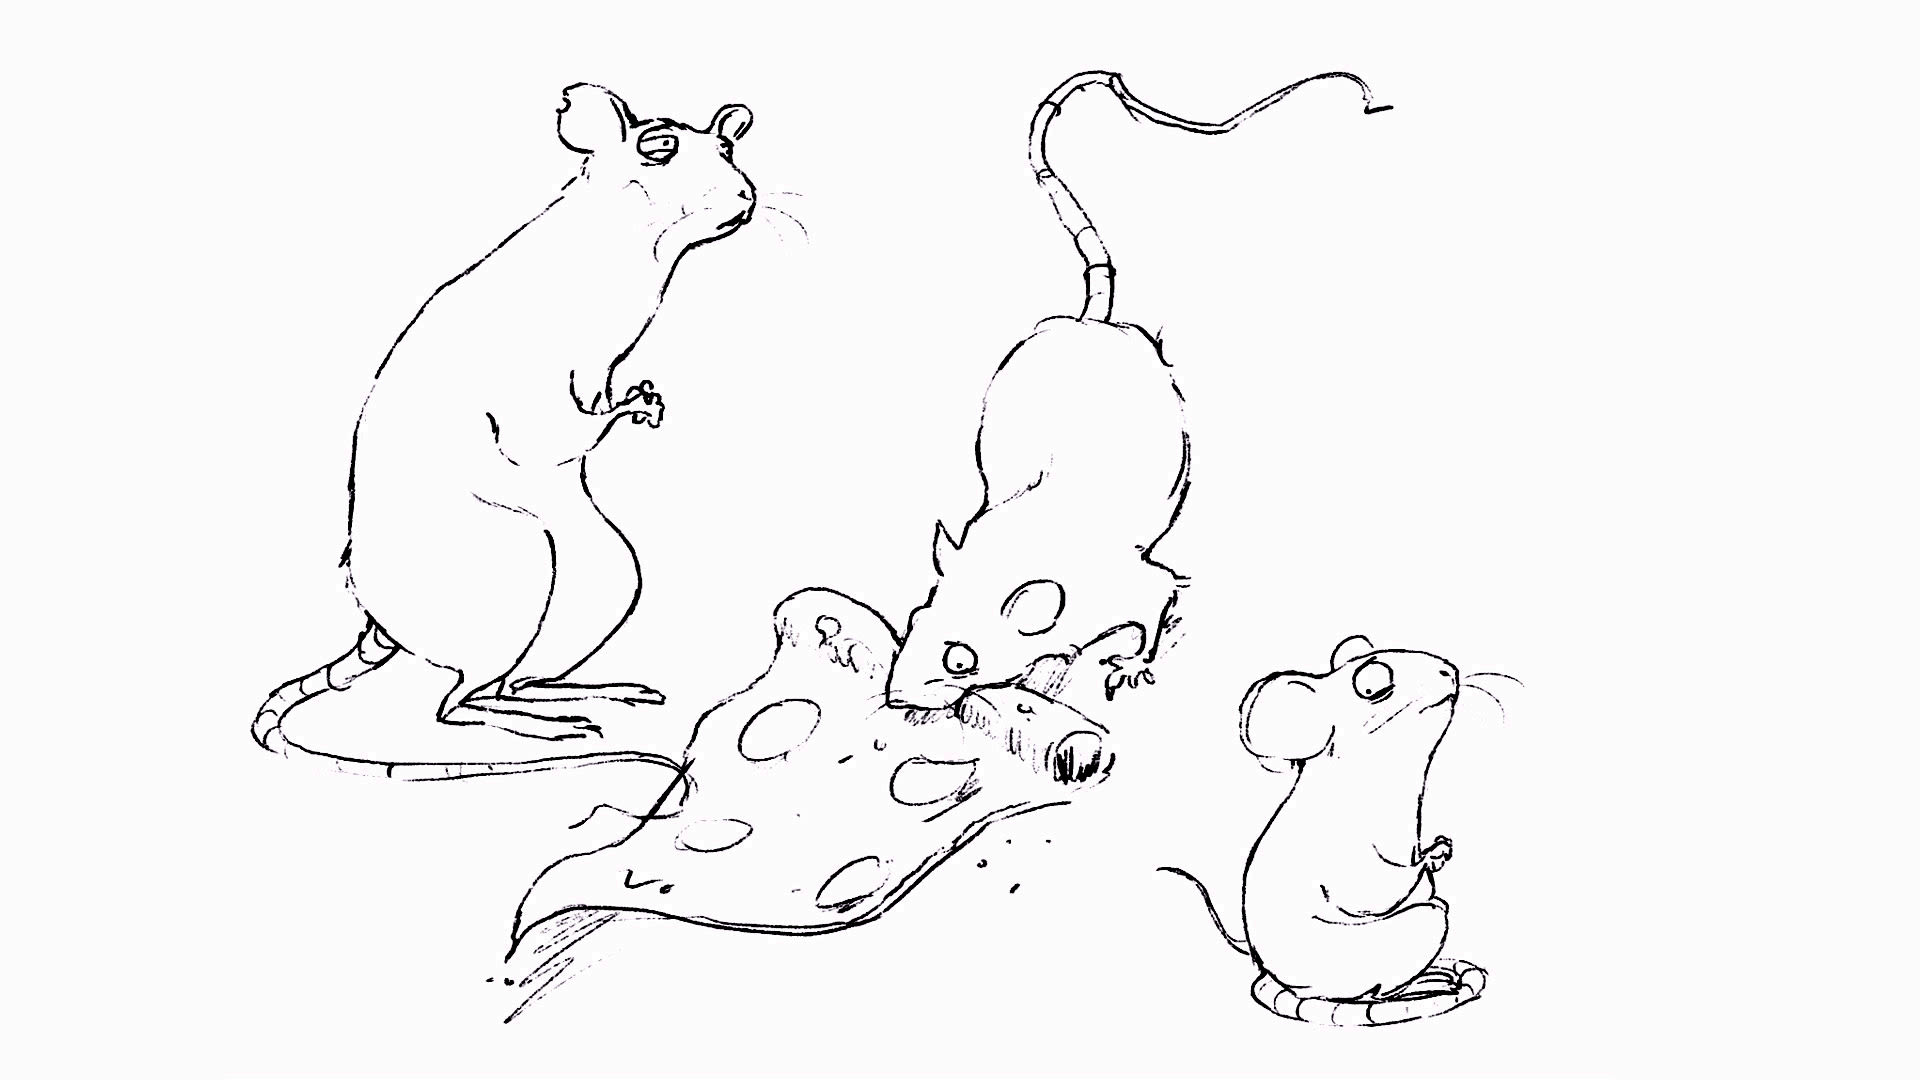 Watch How to Draw the Rats and Pigeons from Your Nightmares | The New Yorker